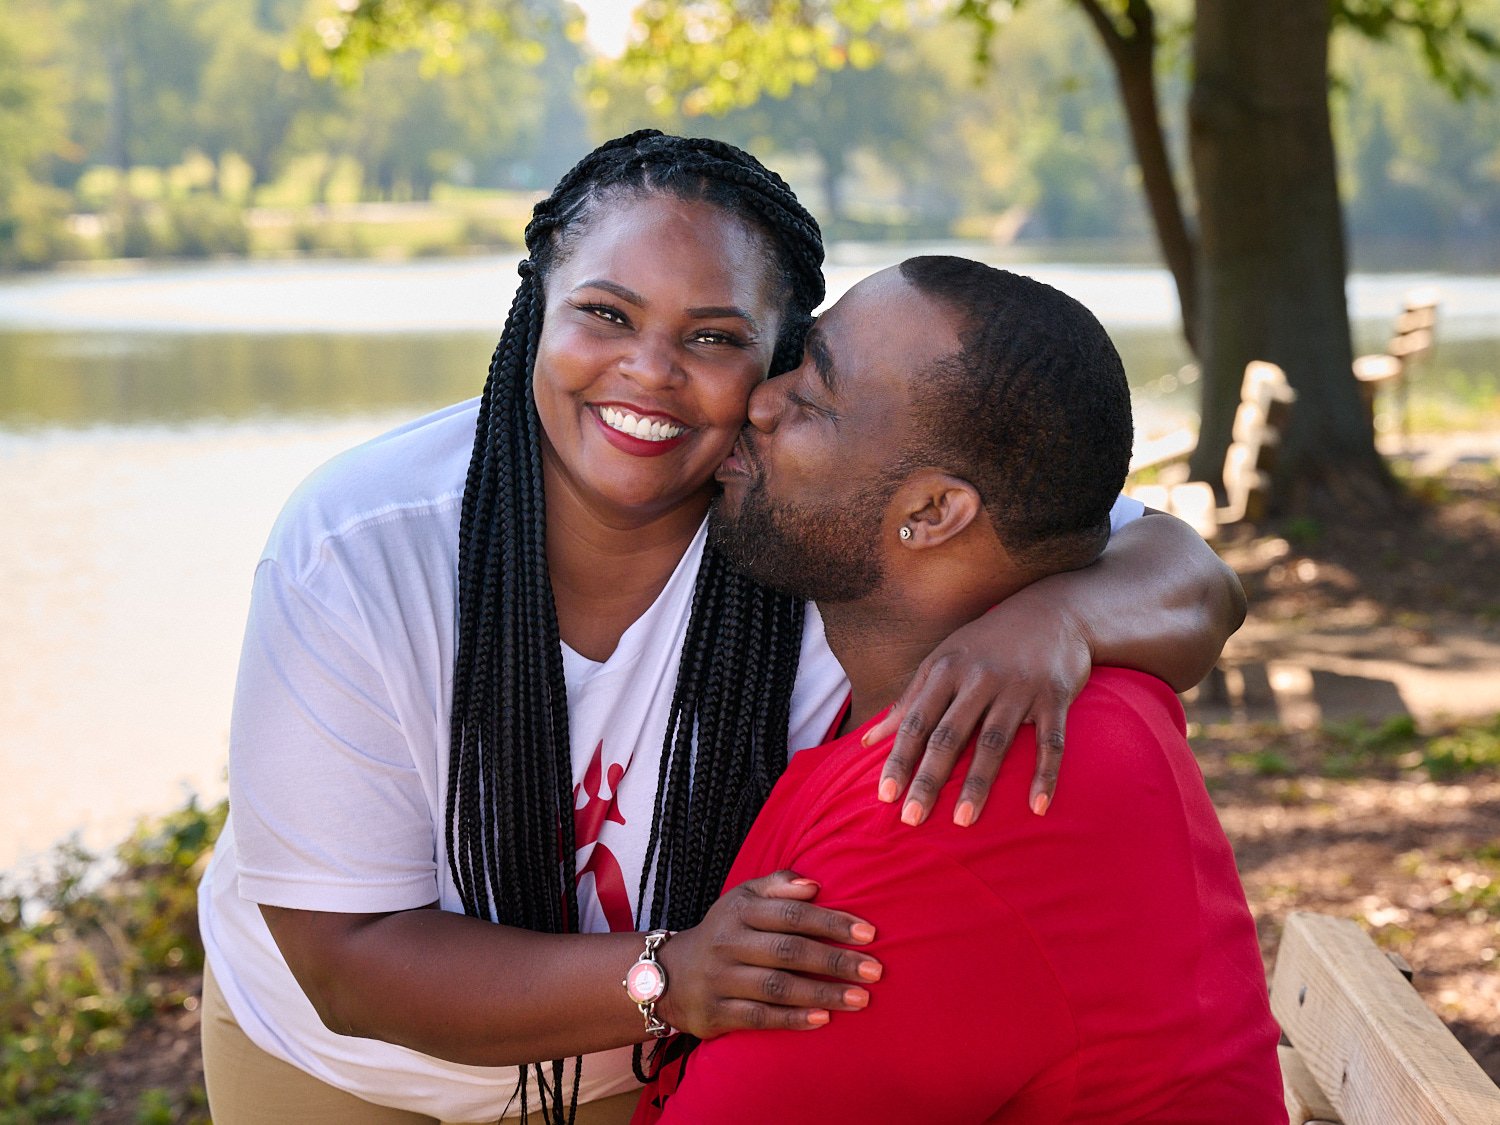  Patrice Carter is posing with her fiance for fun and intimate photos on Marshall Island in North Park near Pittsburgh, PA. It’s a sunny day on the lake shore and the couple looks happy and in love. 